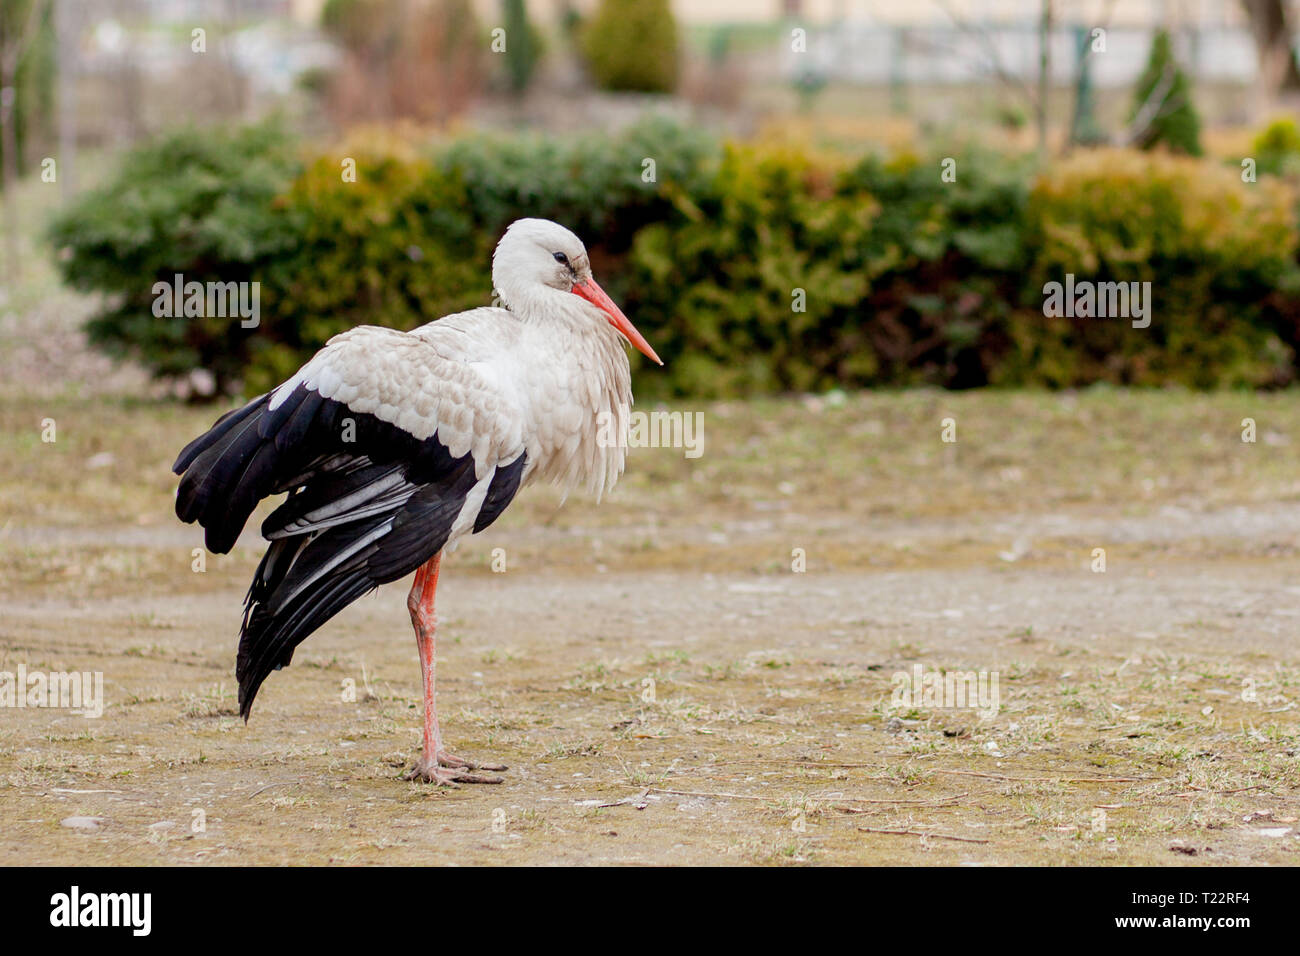 White stork in natural habitat walking and searching for food, Poplar tree forest flood area on river side, rear stork view, unclean white feathers. Stock Photo